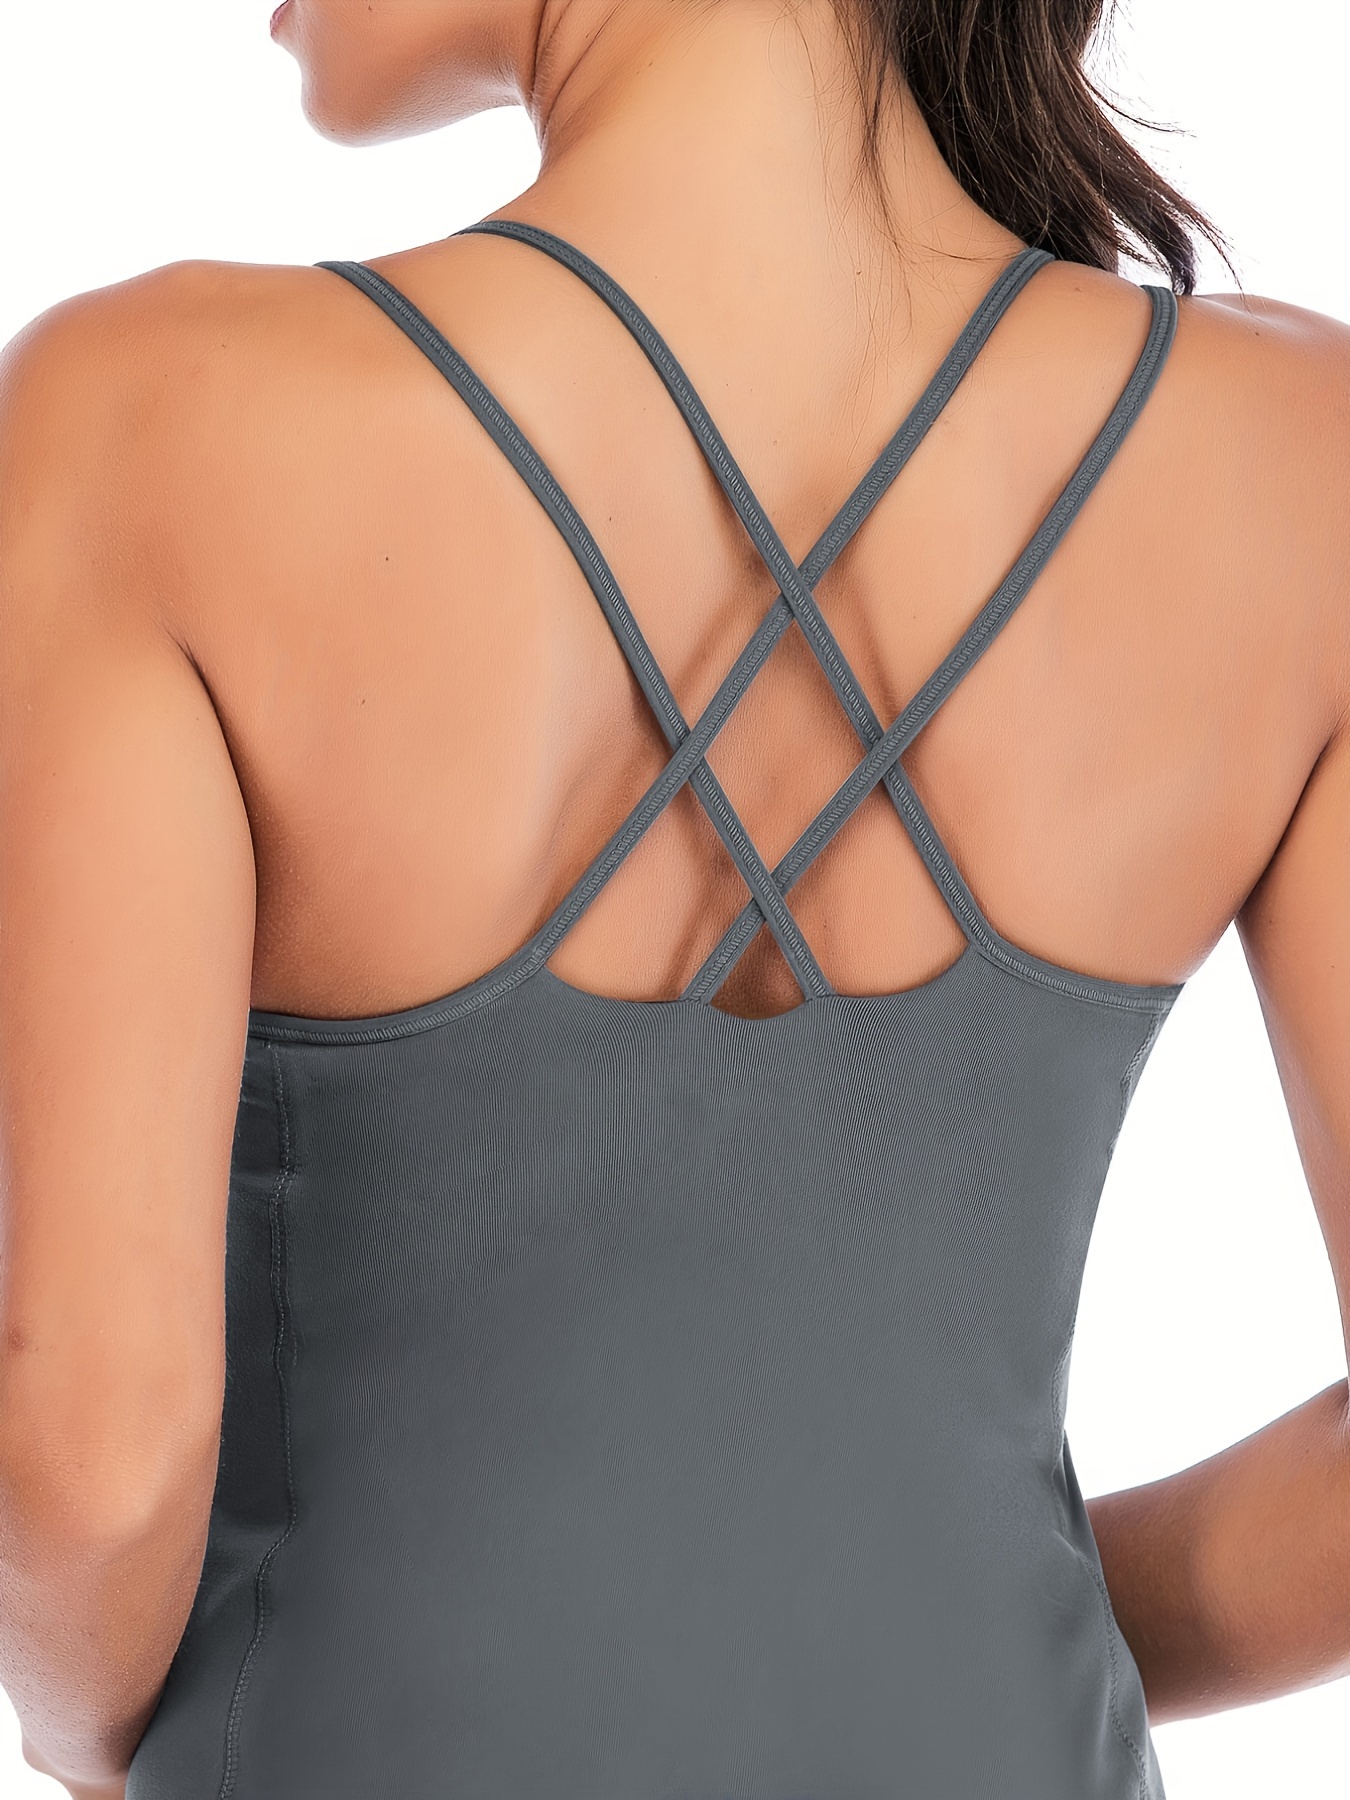 Women's Open Back Workout Tank Top with Built in Bra Athletic Yoga